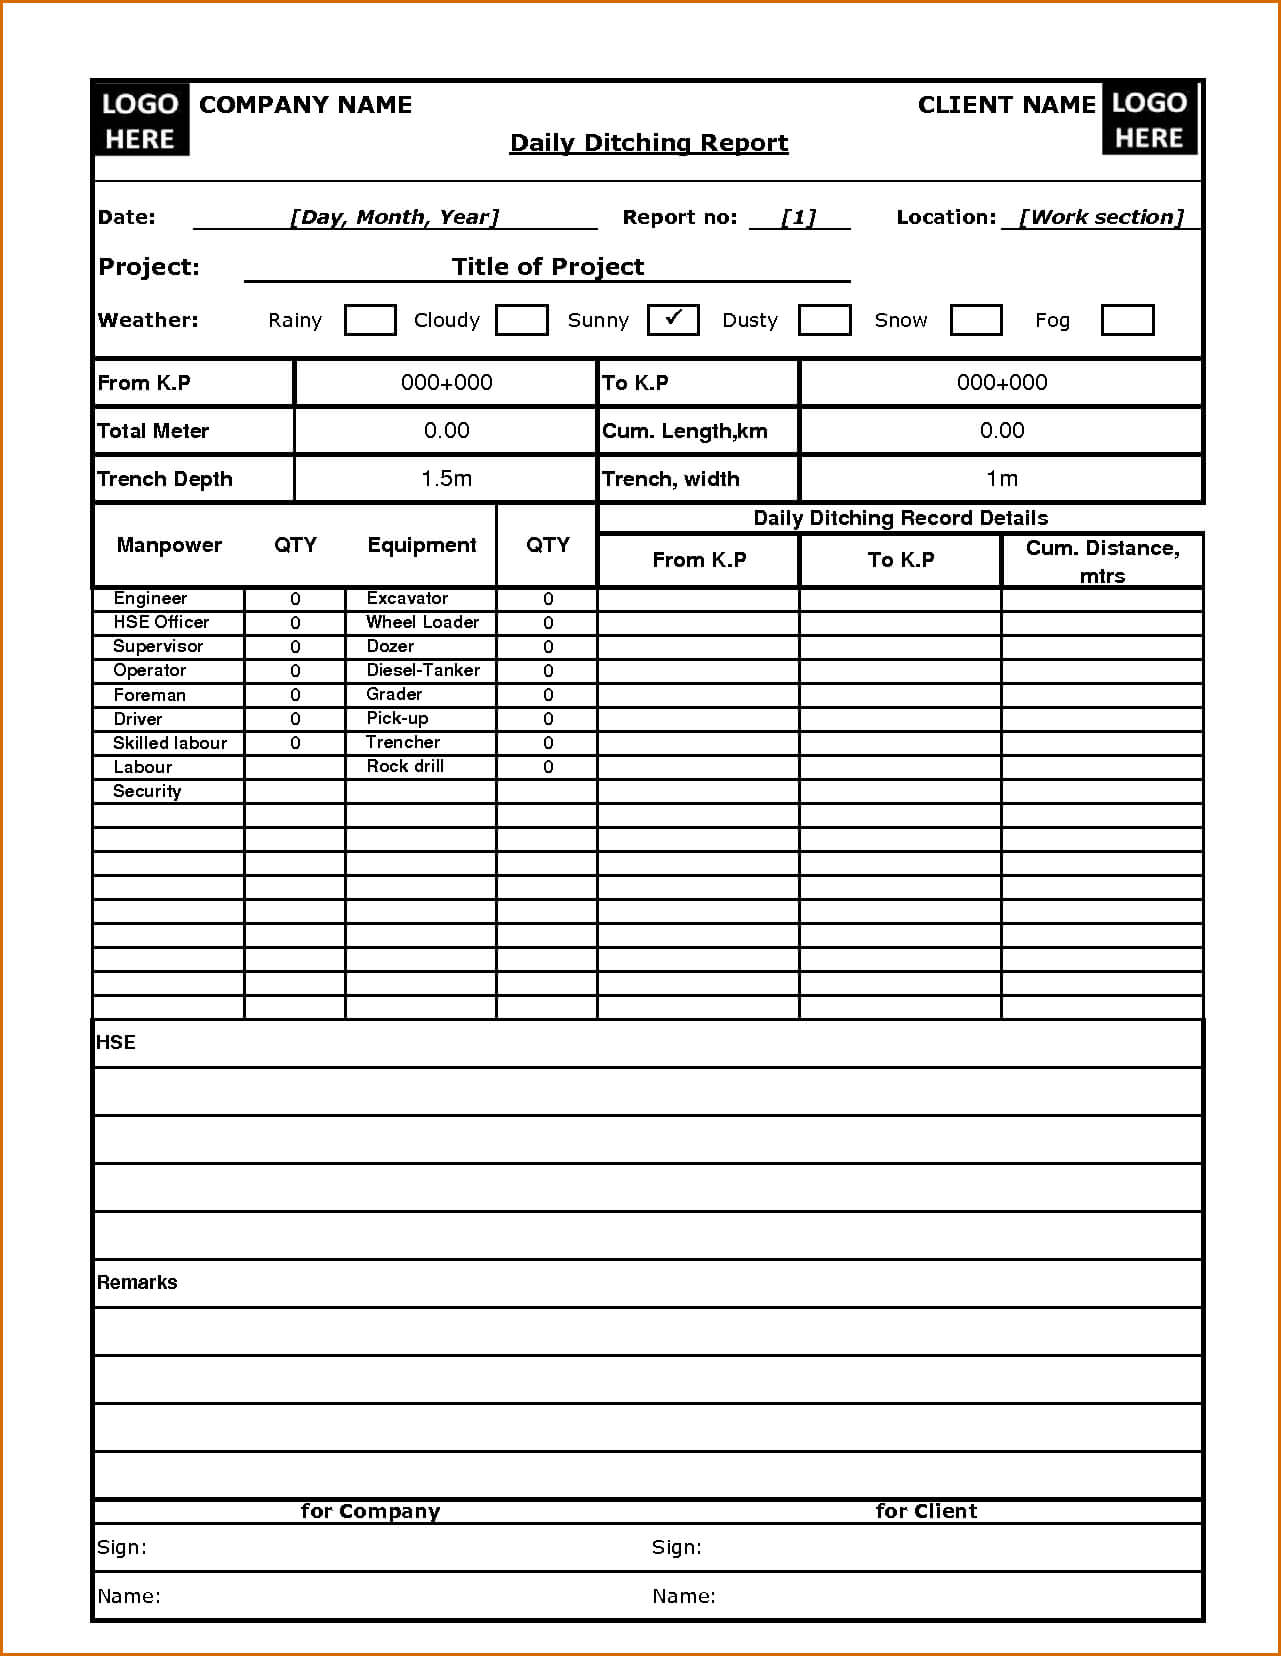 Daily Project Report Format In Excel Free Download With Intended For Patient Report Form Template Download